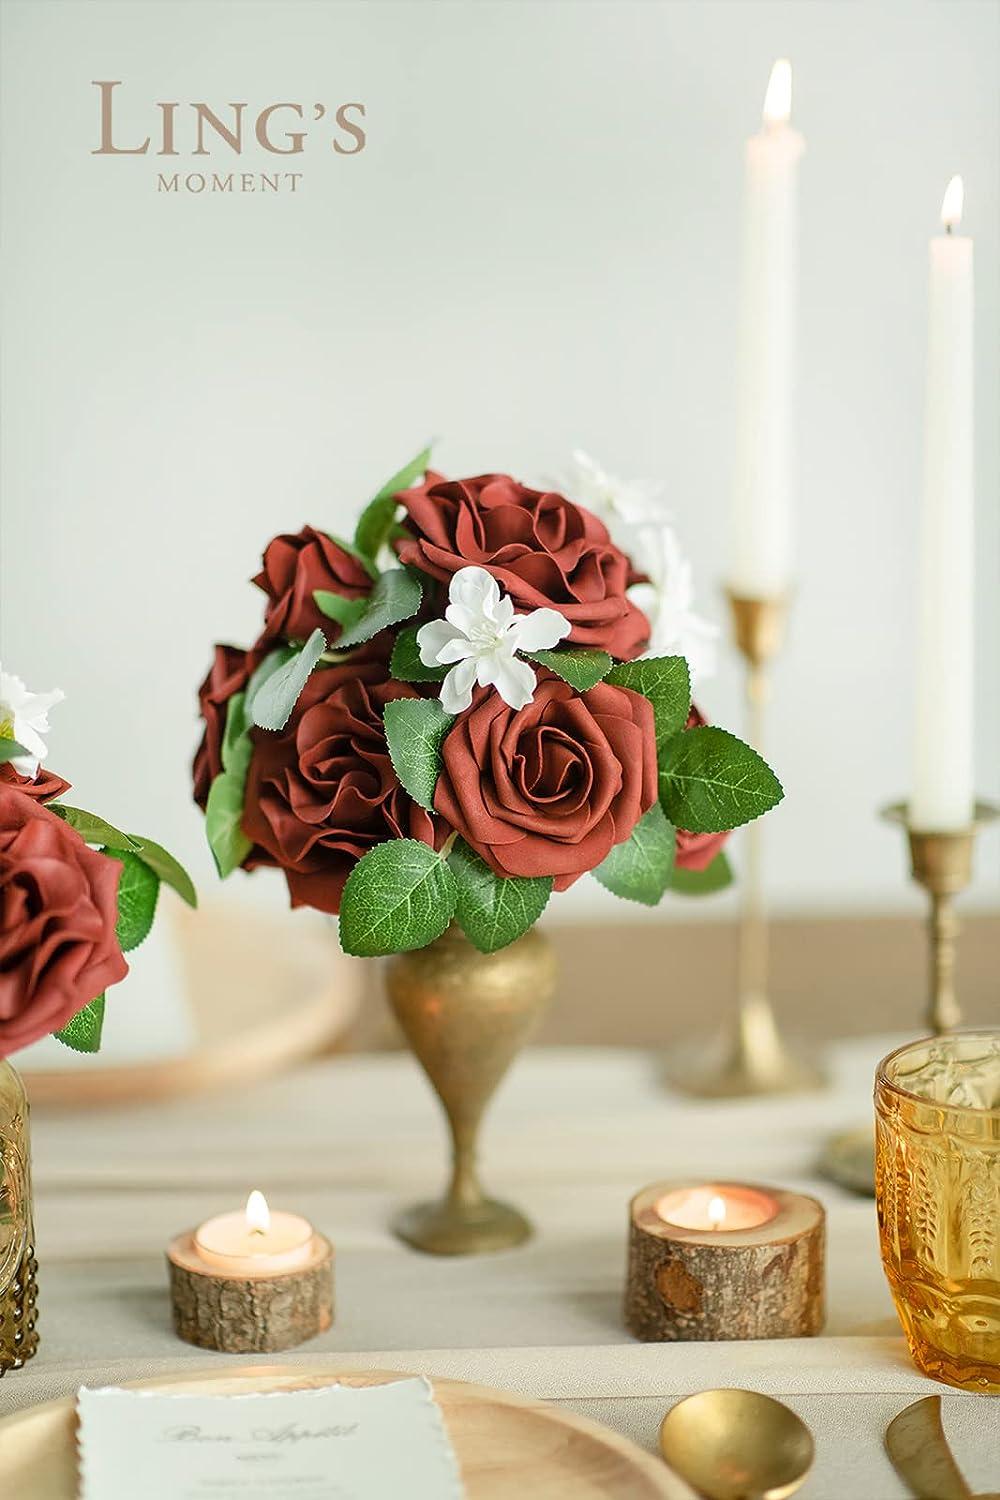 Burgundy Rose Heads, Artificial Flowers, Wedding Centerpieces, Silk Roses, Faux Flowers, Wedding Decorations